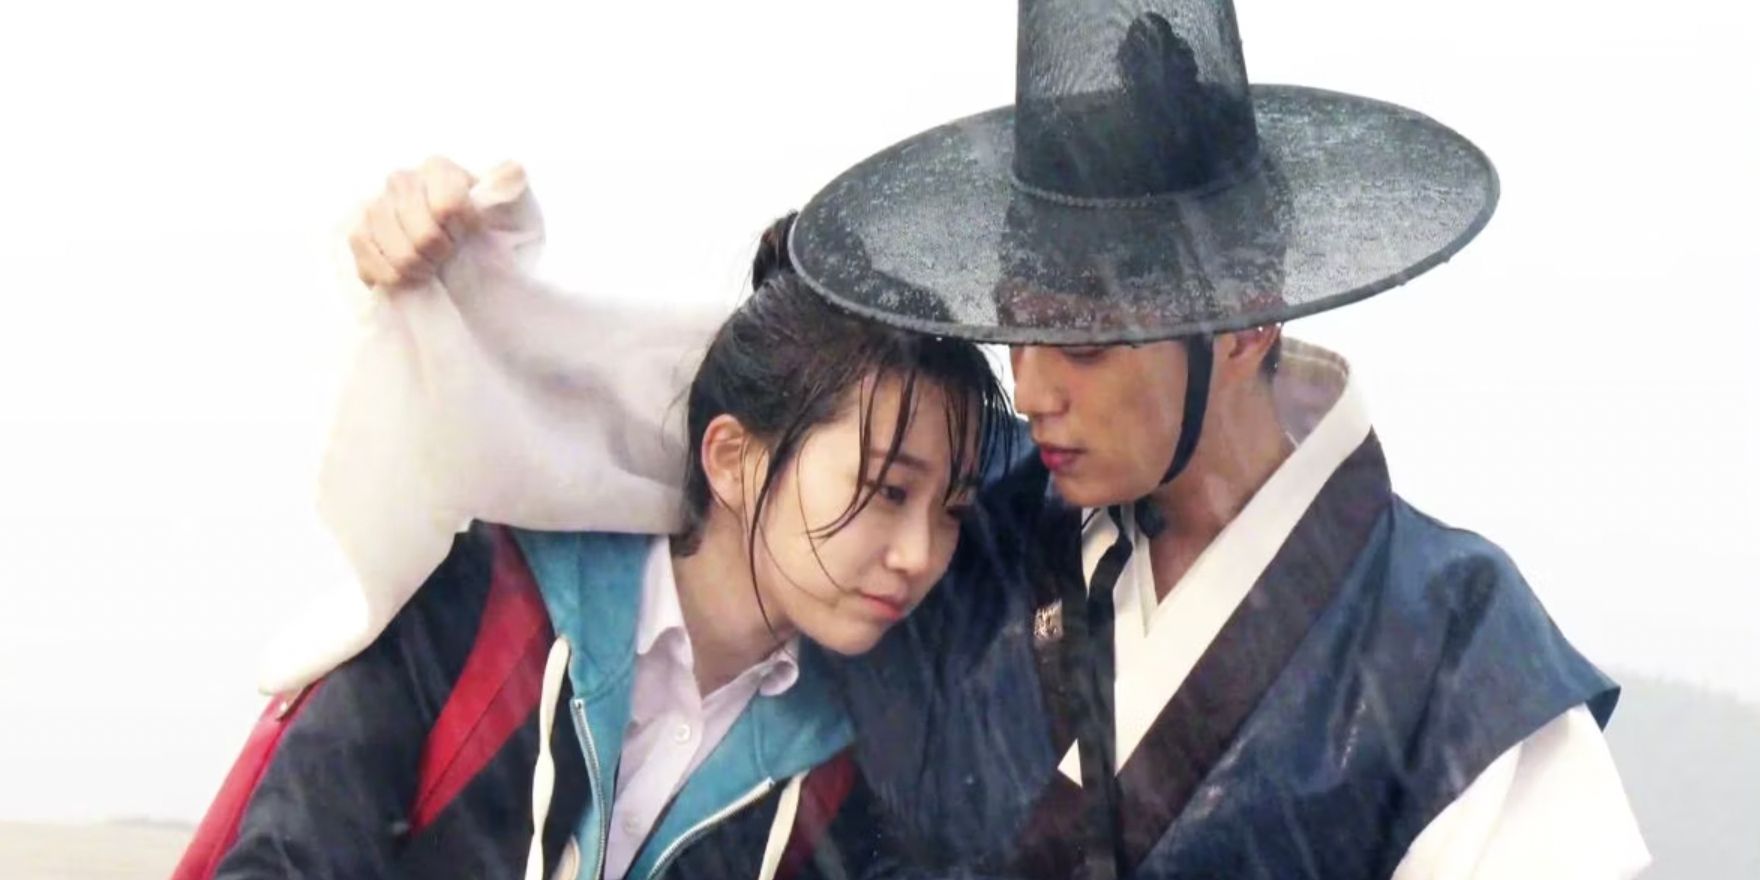 A man tries to cover a woman from the rain in the Korean time travel drama Splash Splash Love